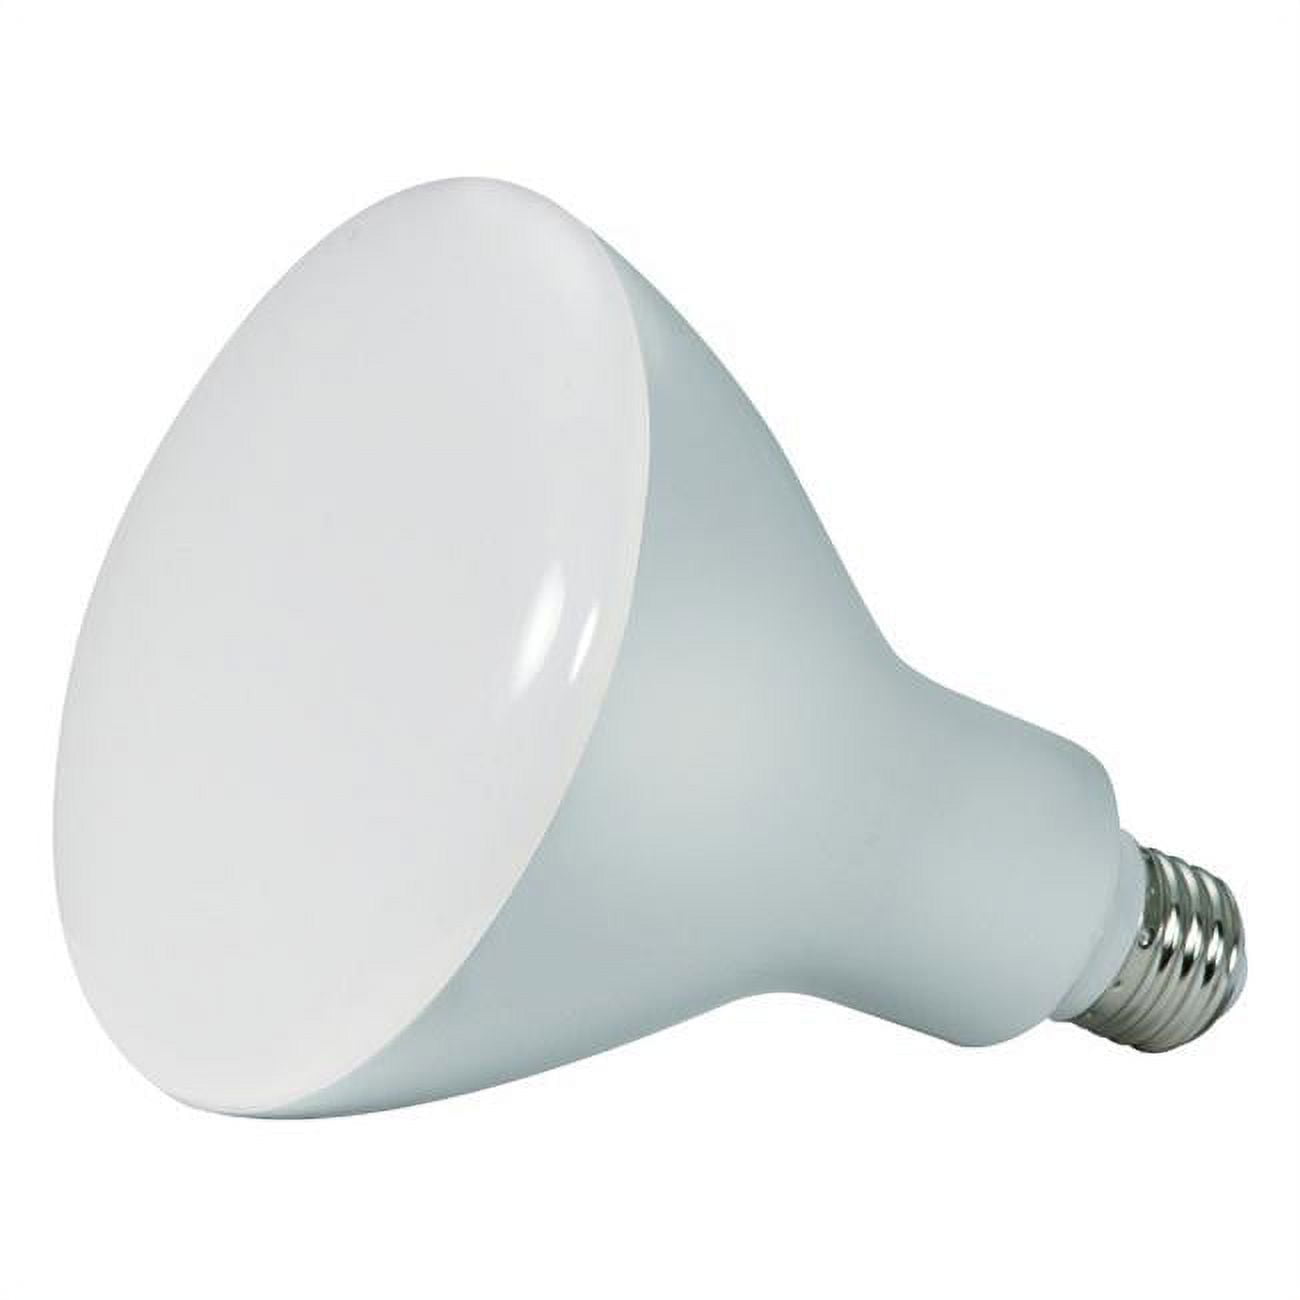 Picture of Satco 3863180 11.5 watts BR40 LED Bulb with 940 Lumens Natural Light Reflector 75 watts Equivalence